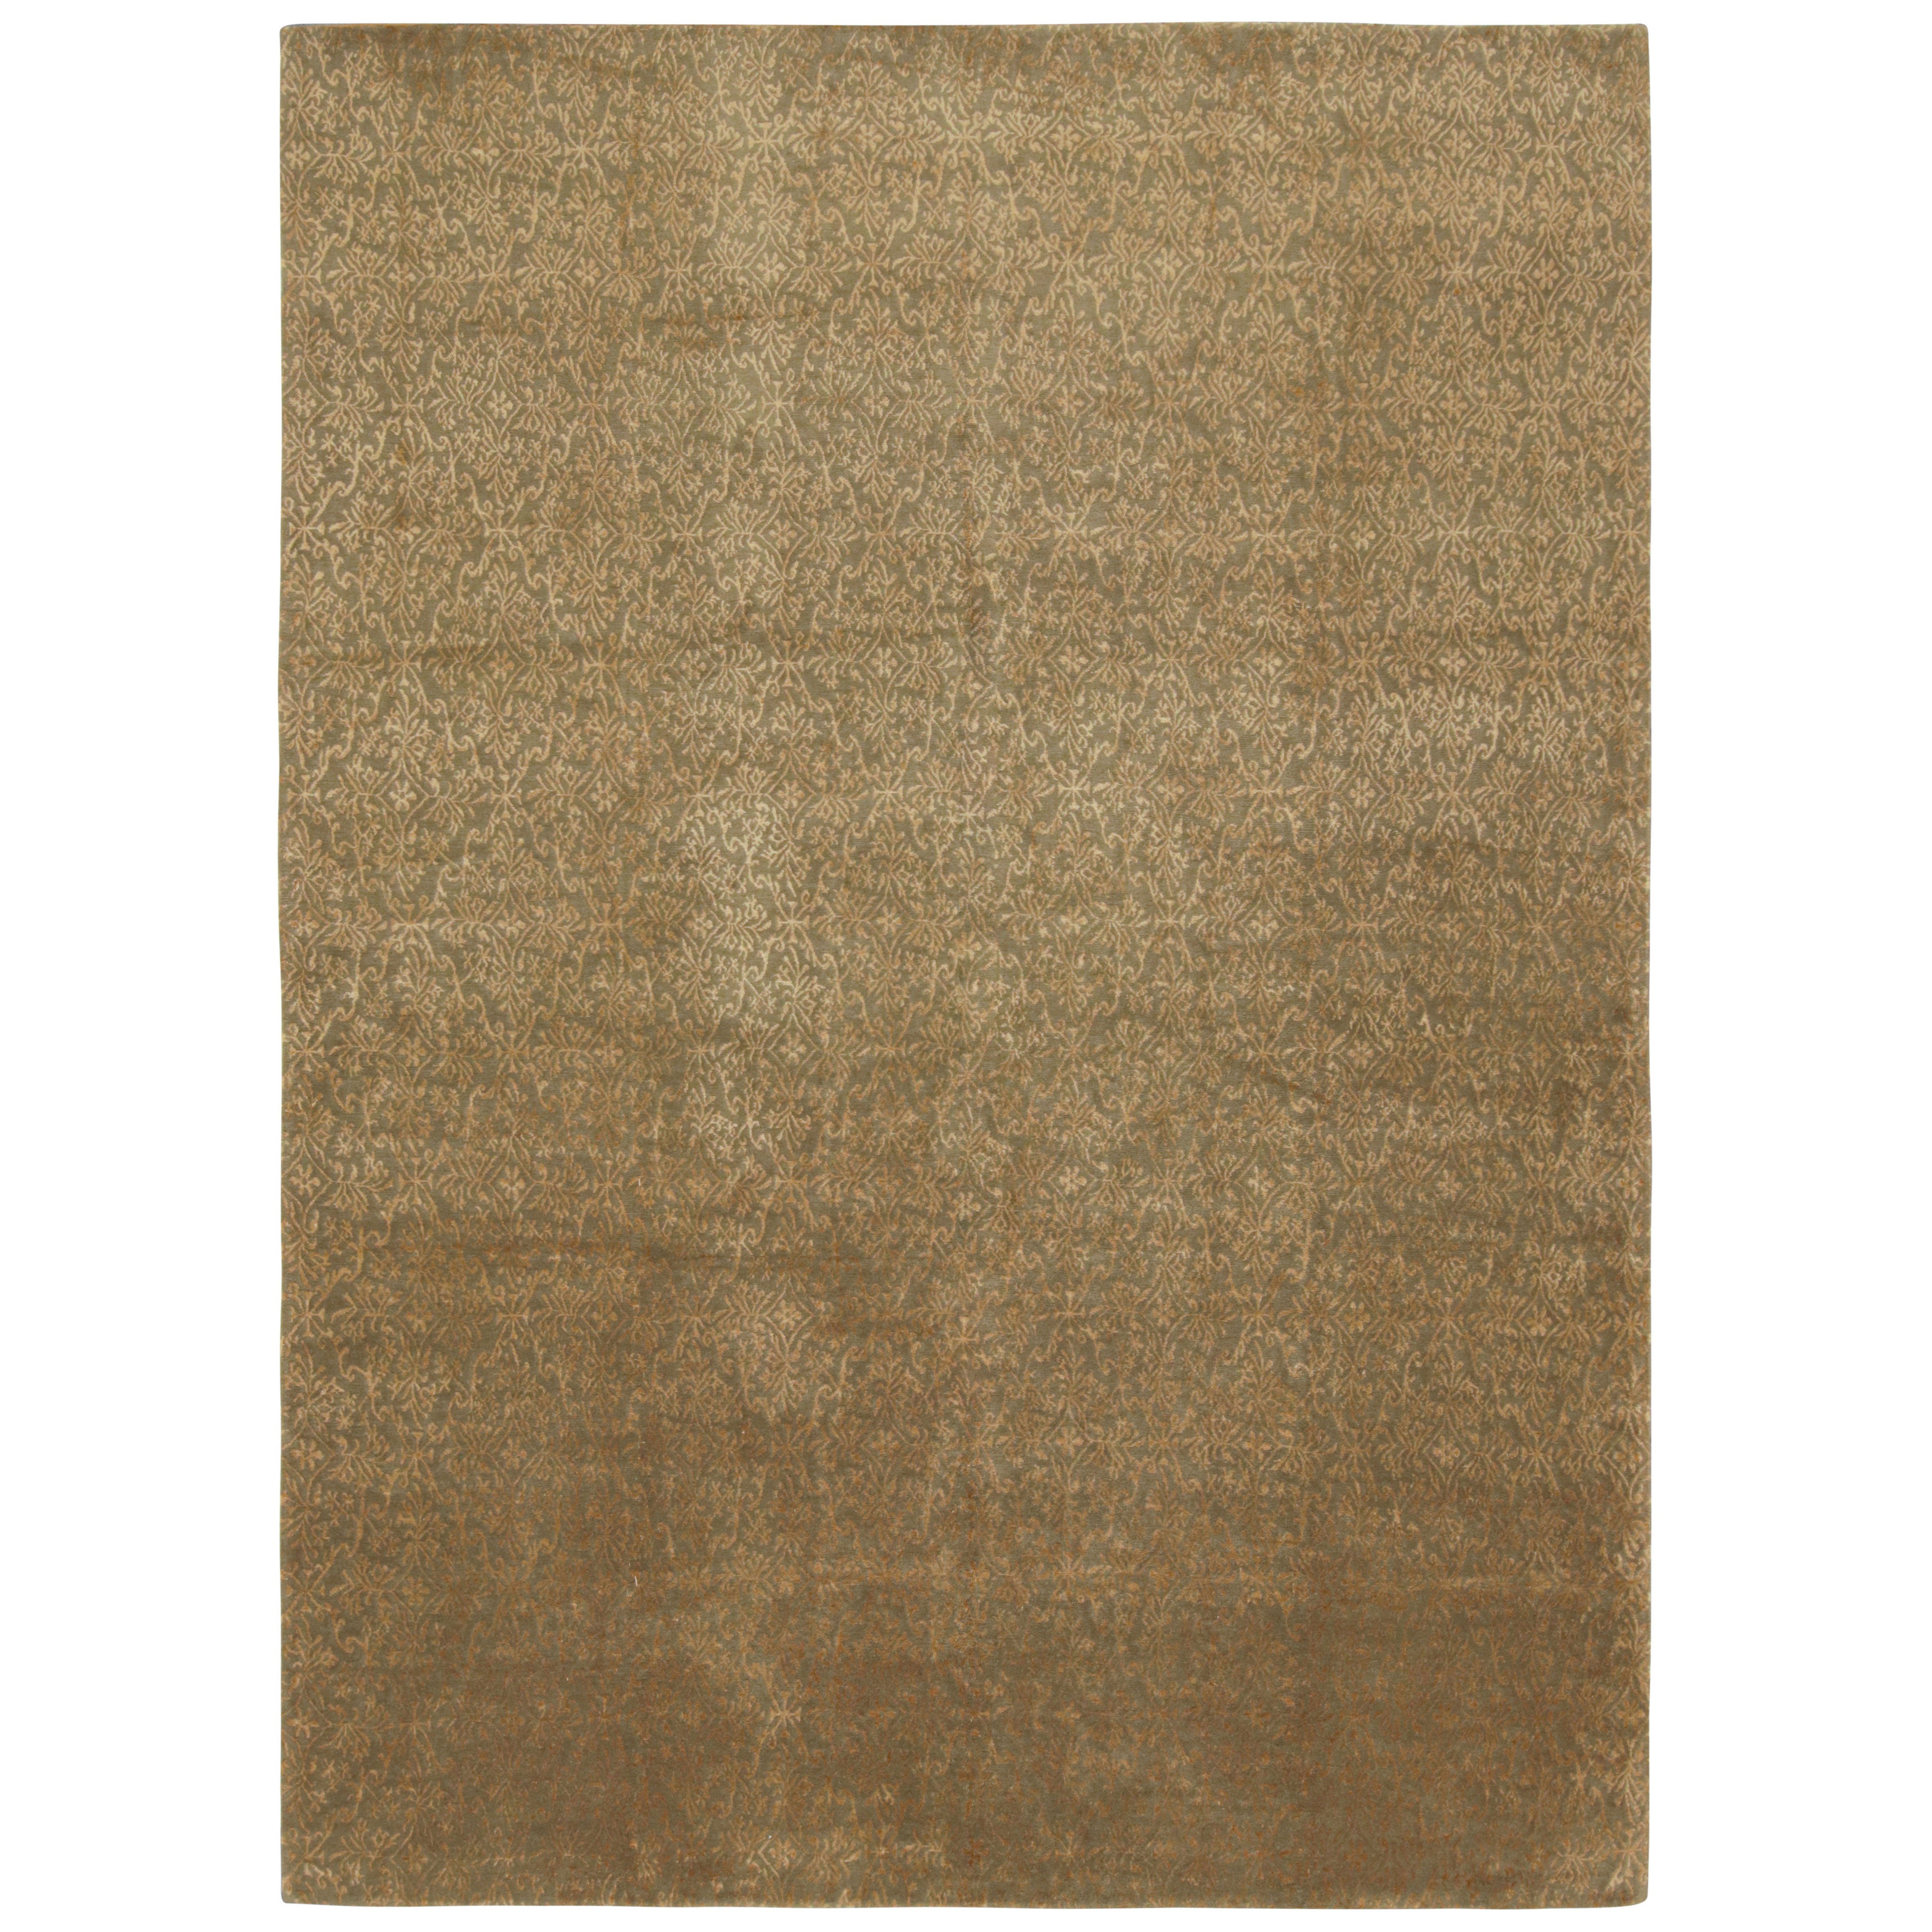 Rug & Kilim’s European Style Rug in Brown and Gold with Floral Pattern “Cordoba” For Sale